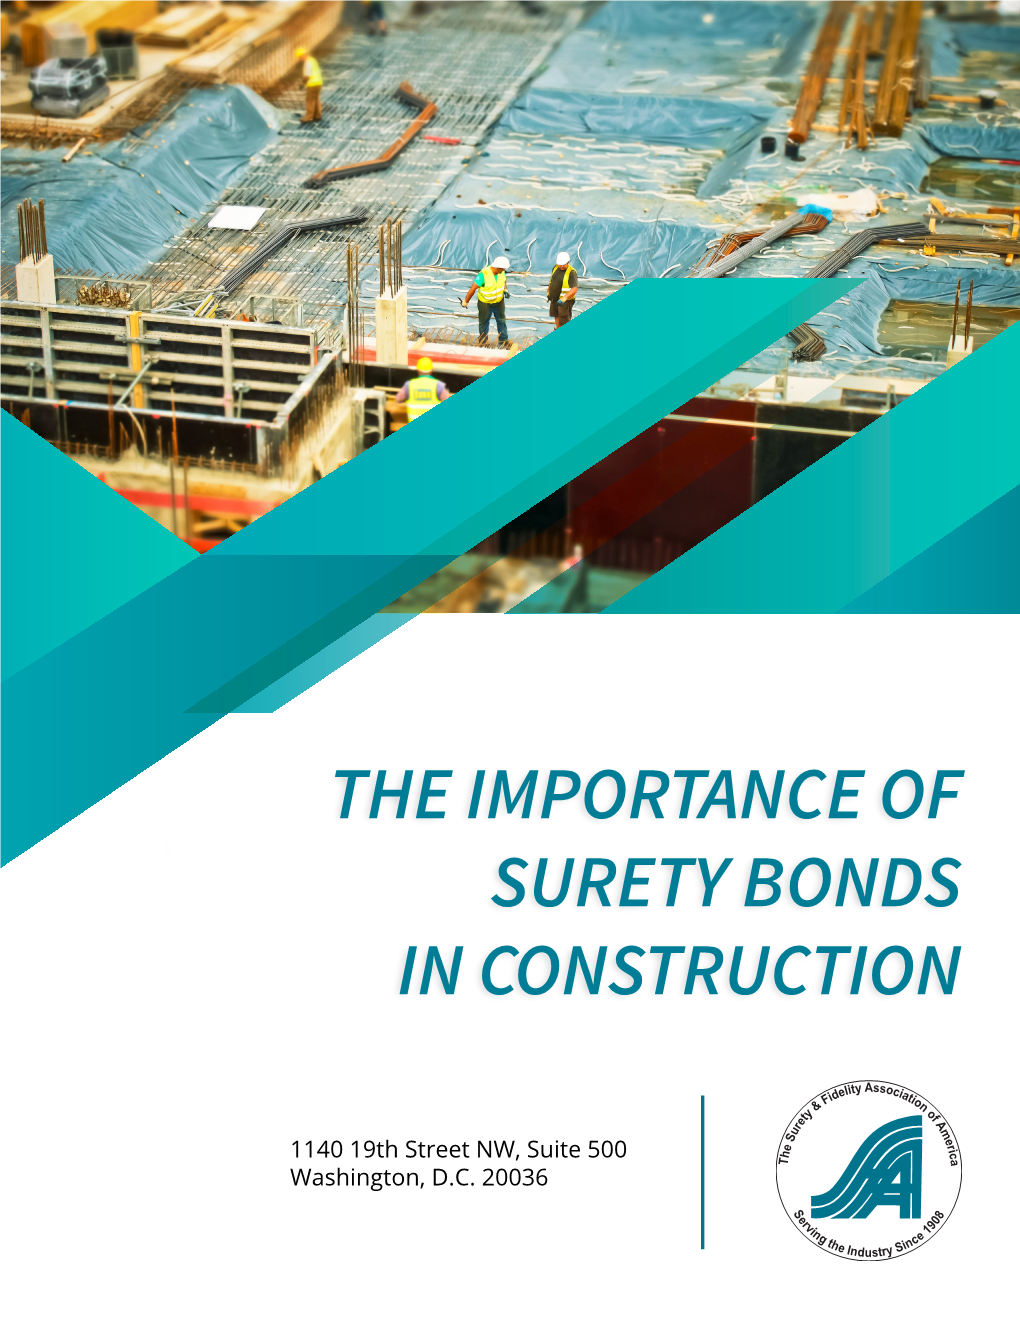 The Importance of Surety Bonds in Construction